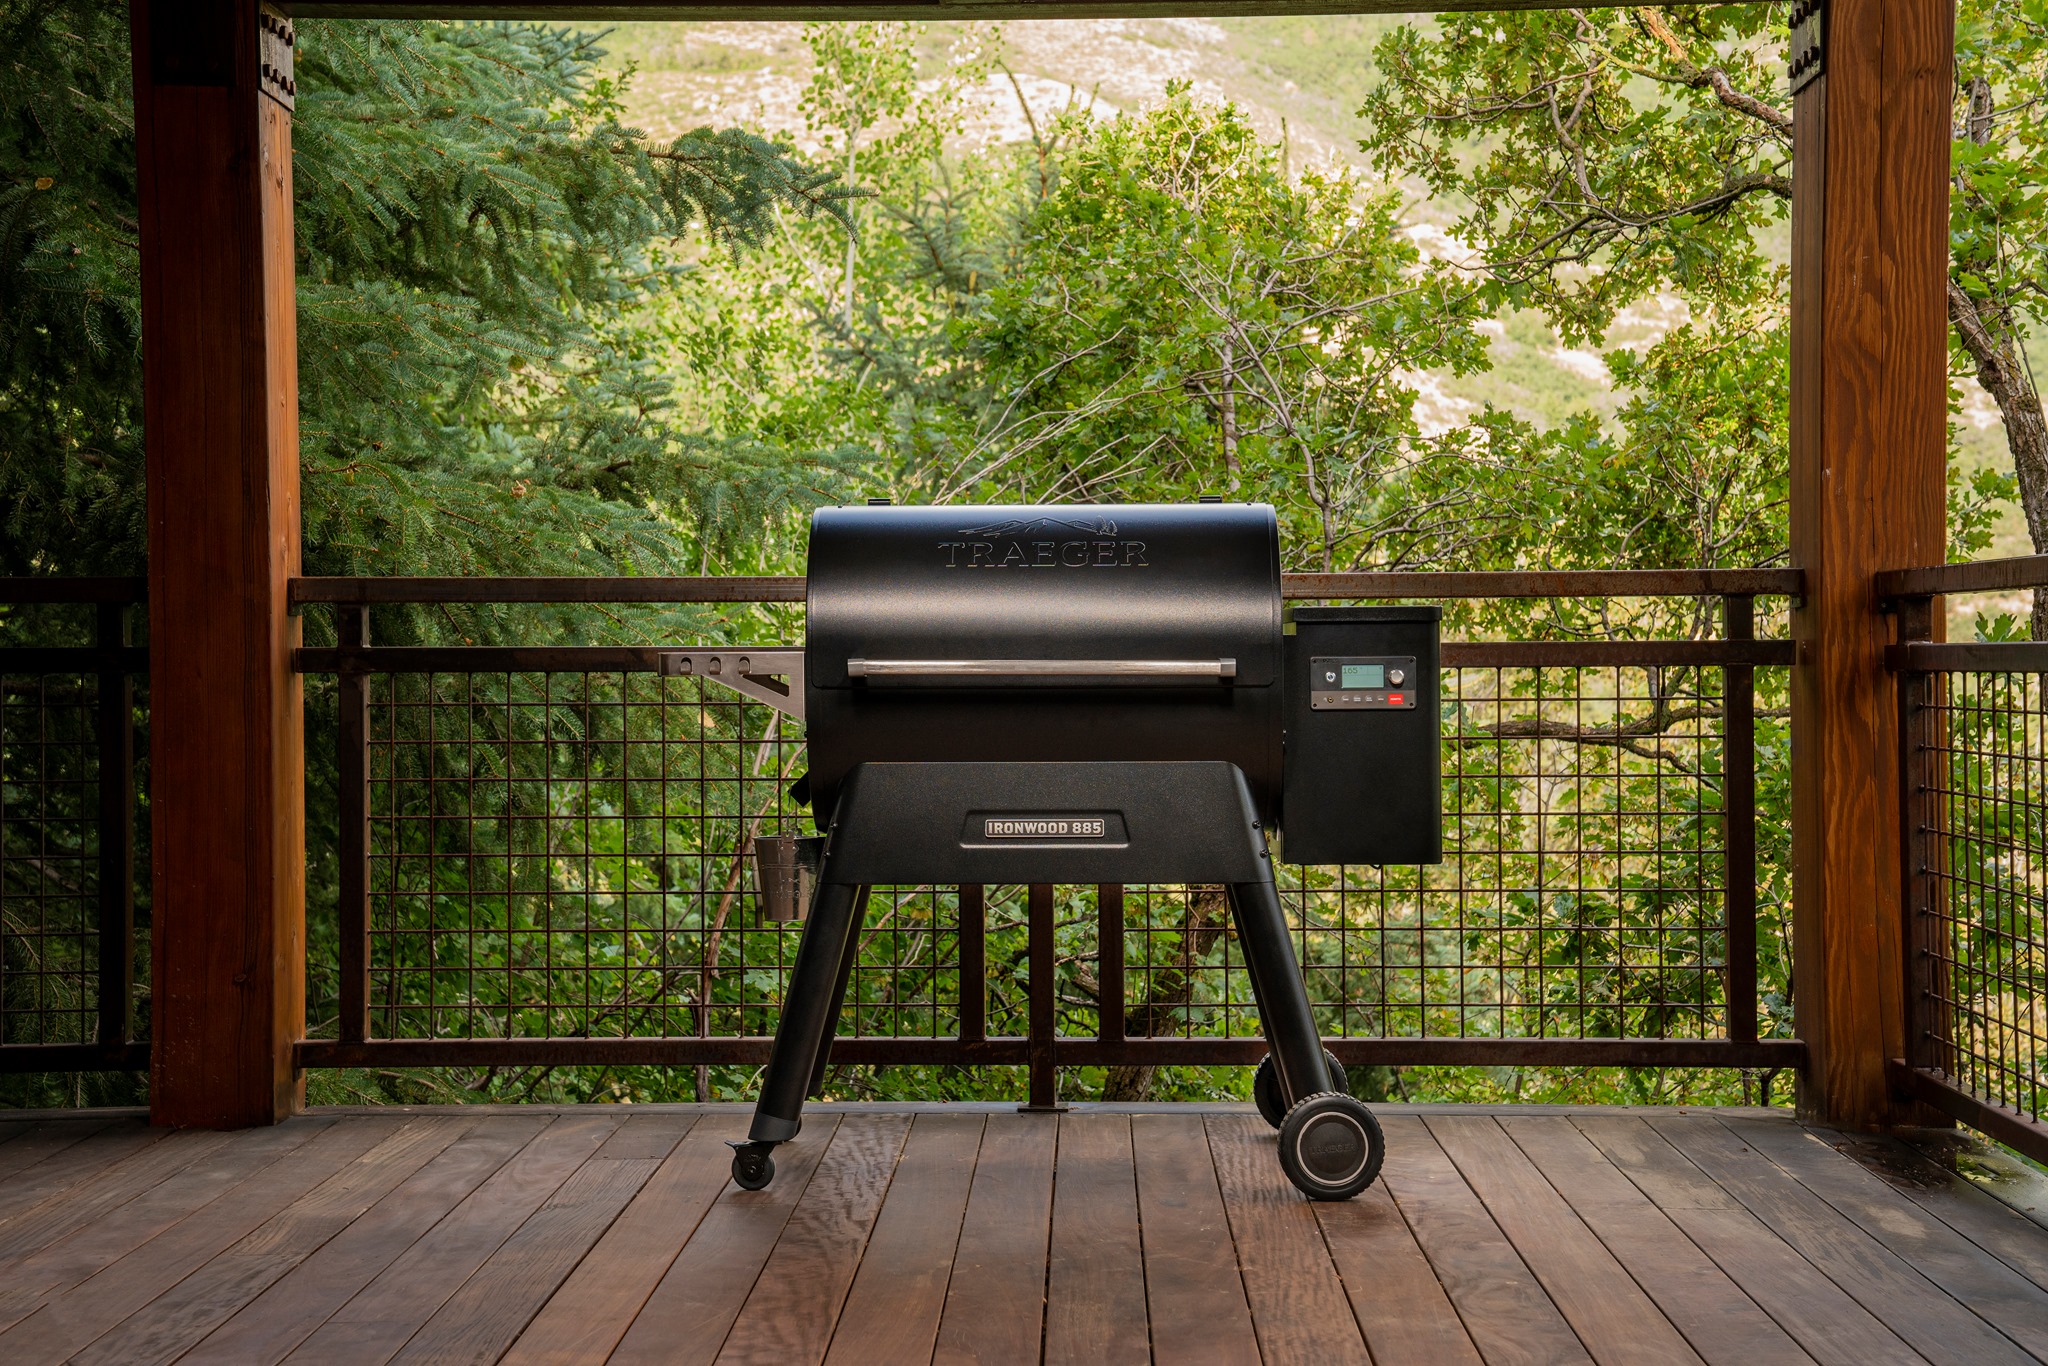 4th of July Traeger Grill Recipes